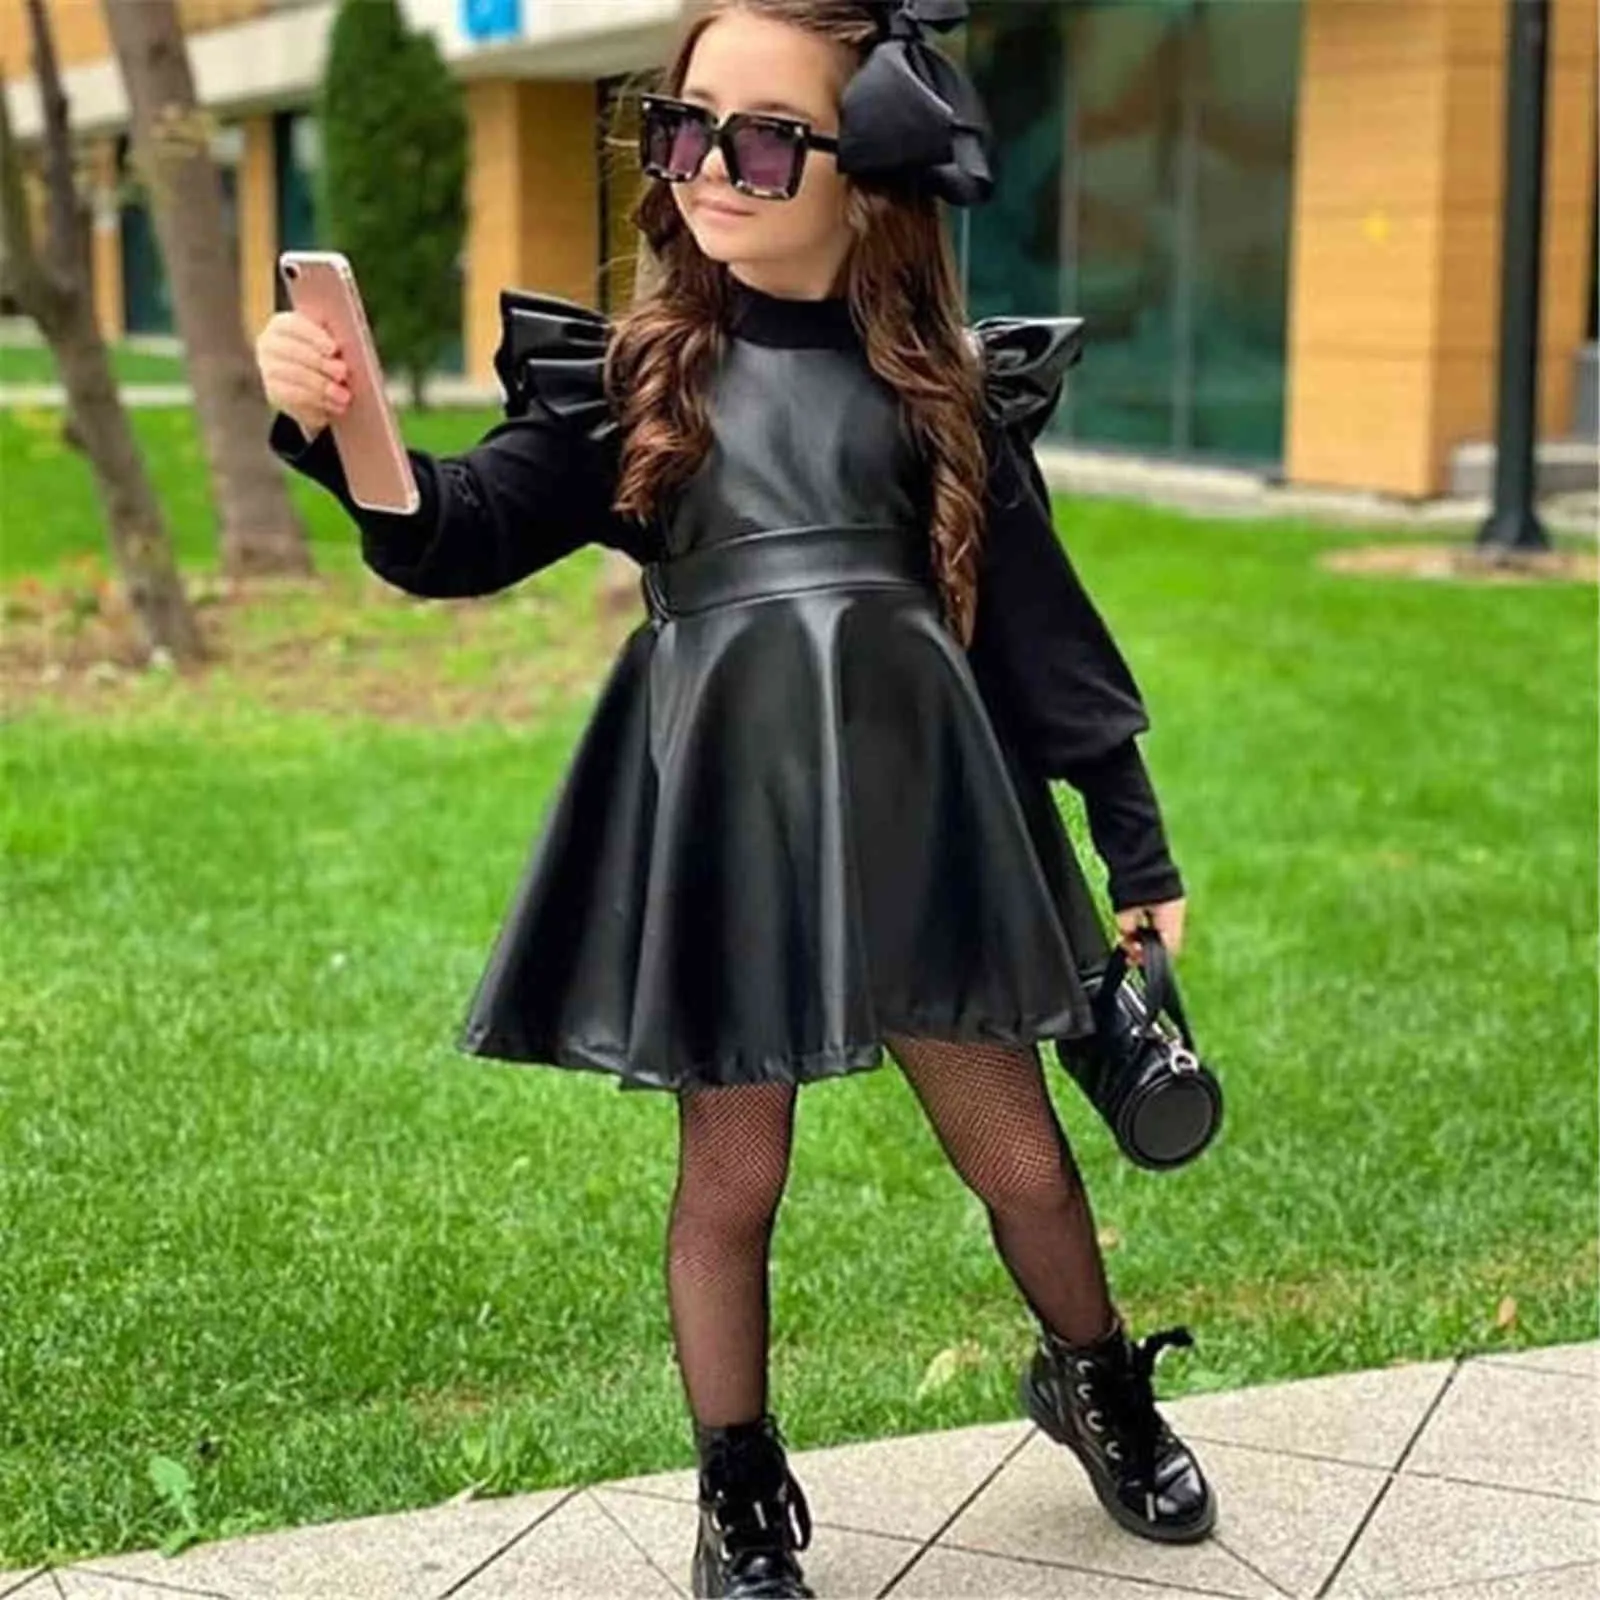 WenaZao Toddler Kids Baby Girls Spring Autumn Overall Black Faux Leather Ruffles Short Sleeve Backless Suspender Princess Dress G1129